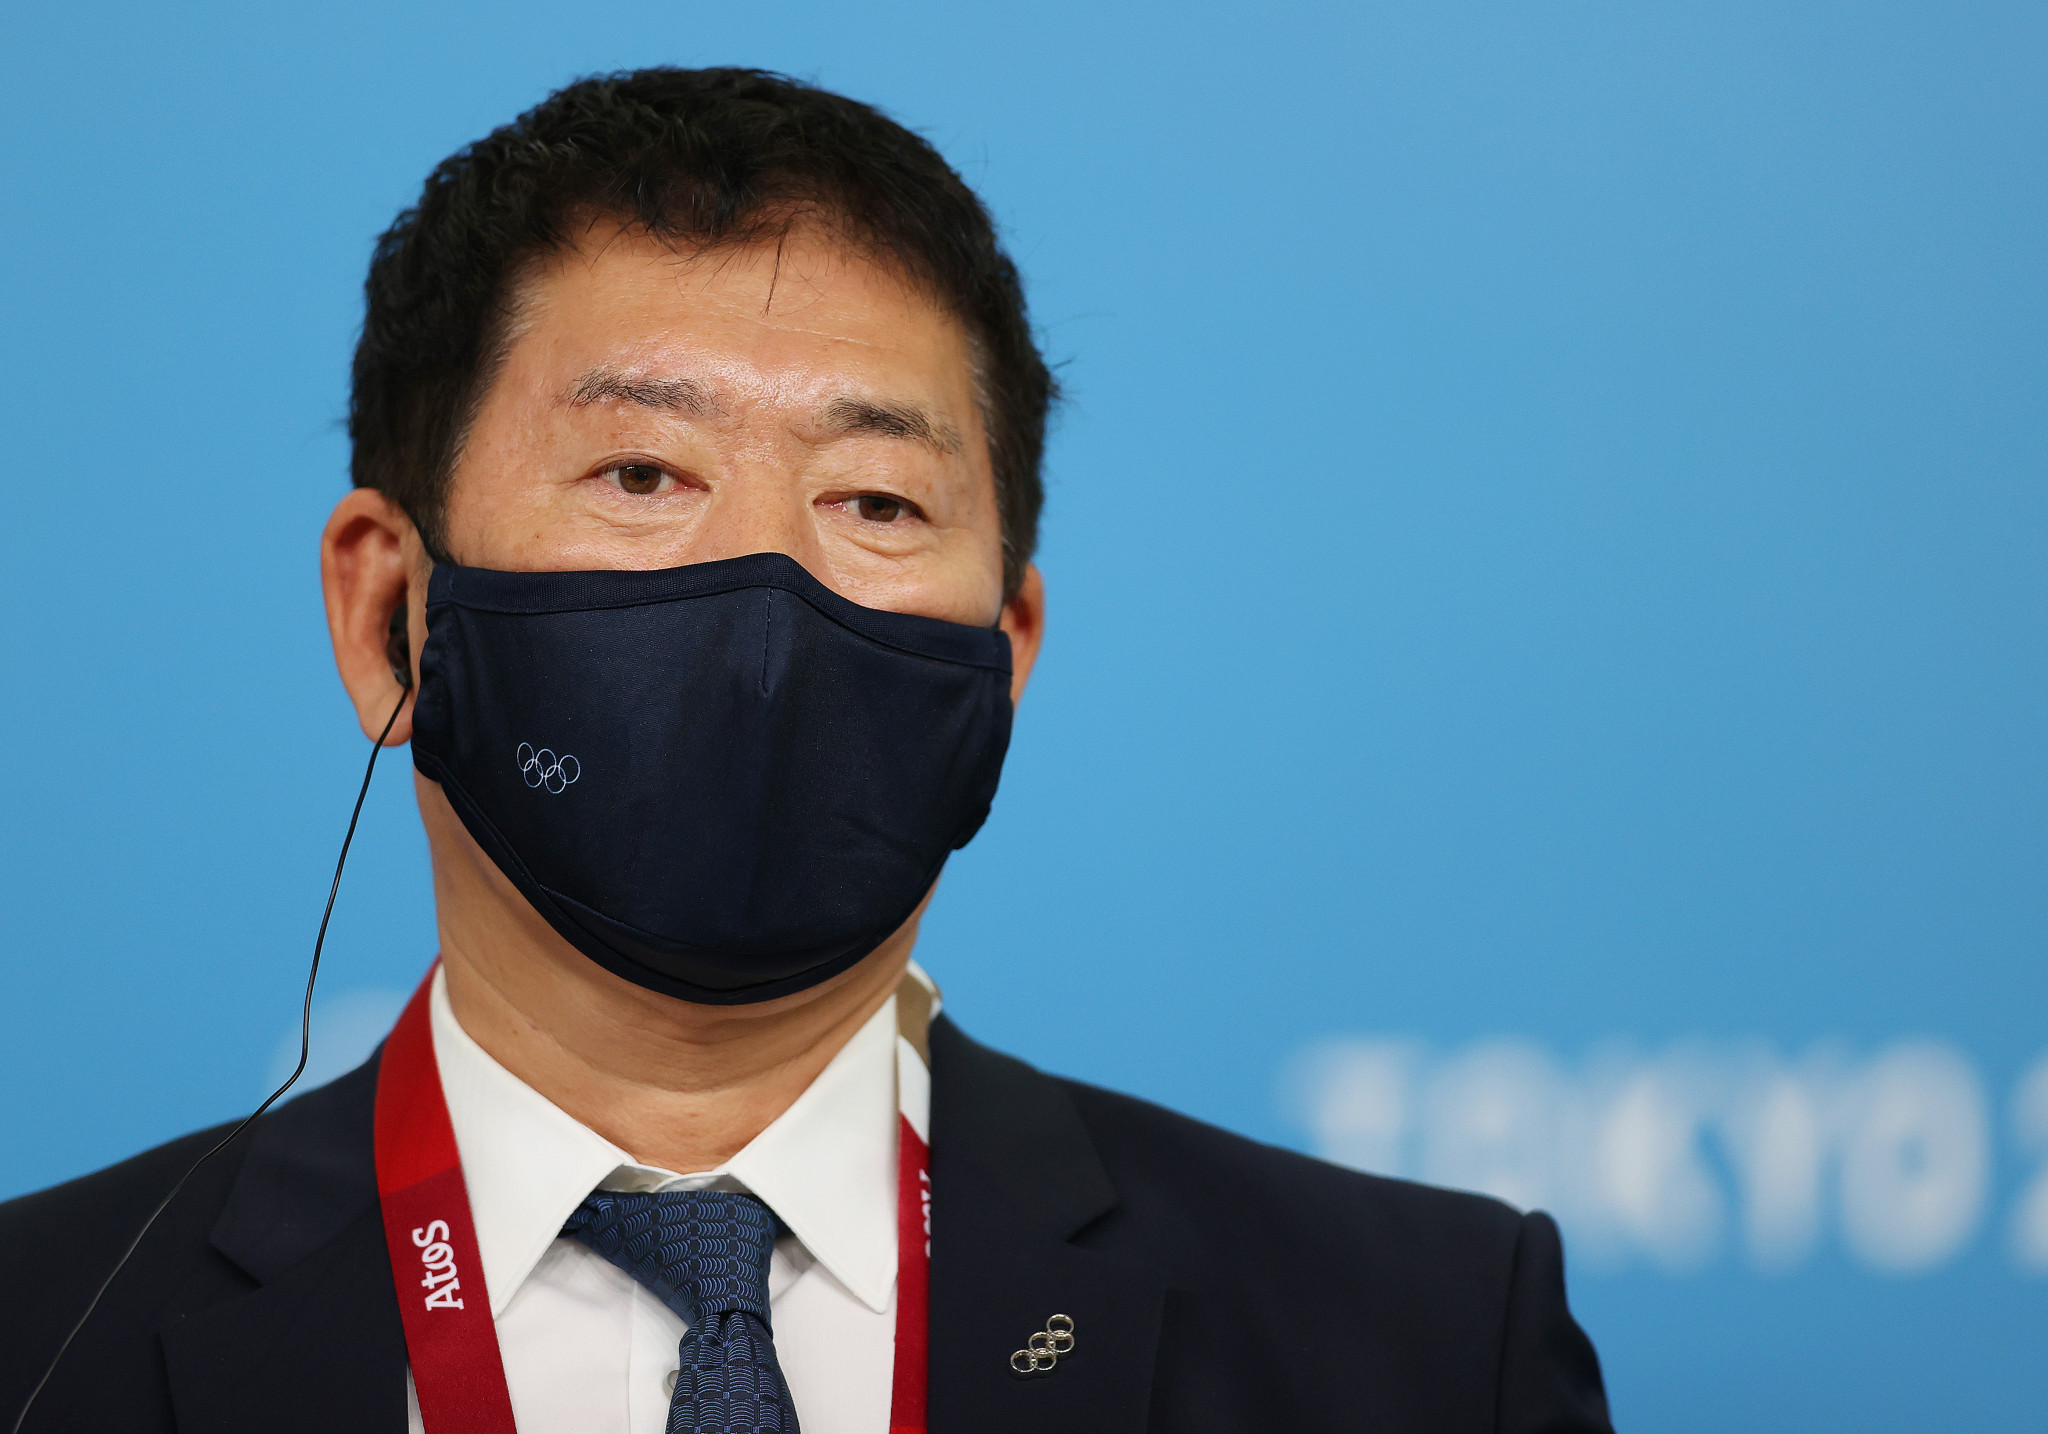 FIG President Morinari Watanabe, an IOC member since 2018, was re-elected as FIG President at the Congress in Antalya last year ©Getty Images